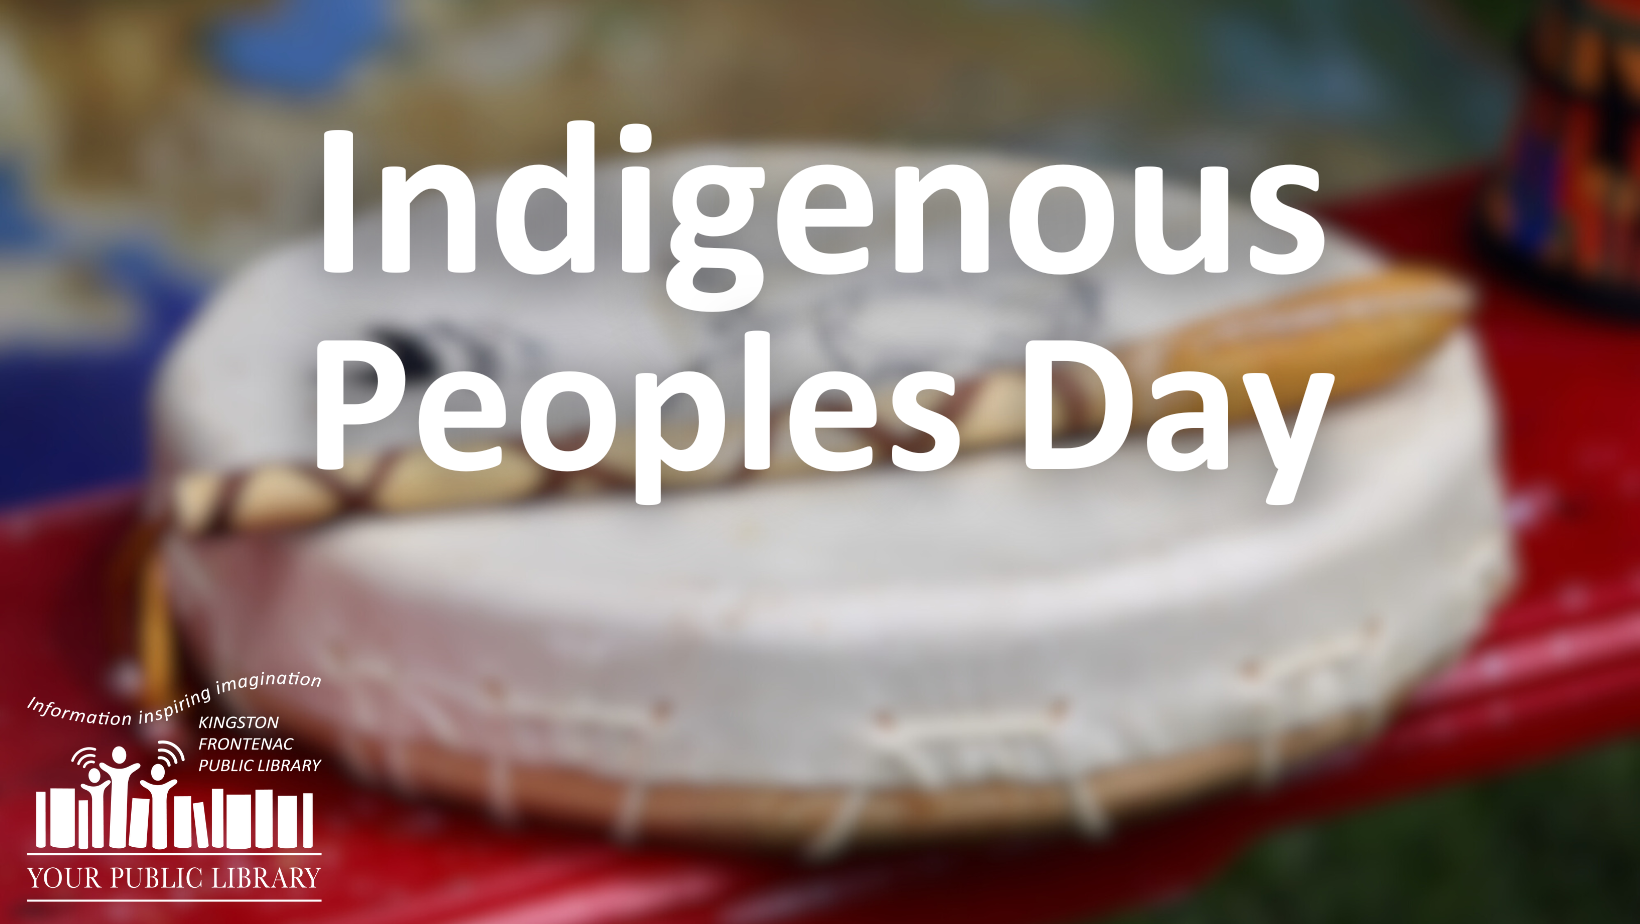 A blurred image of a drum with text overtop reading Indigenous Peoples Day.